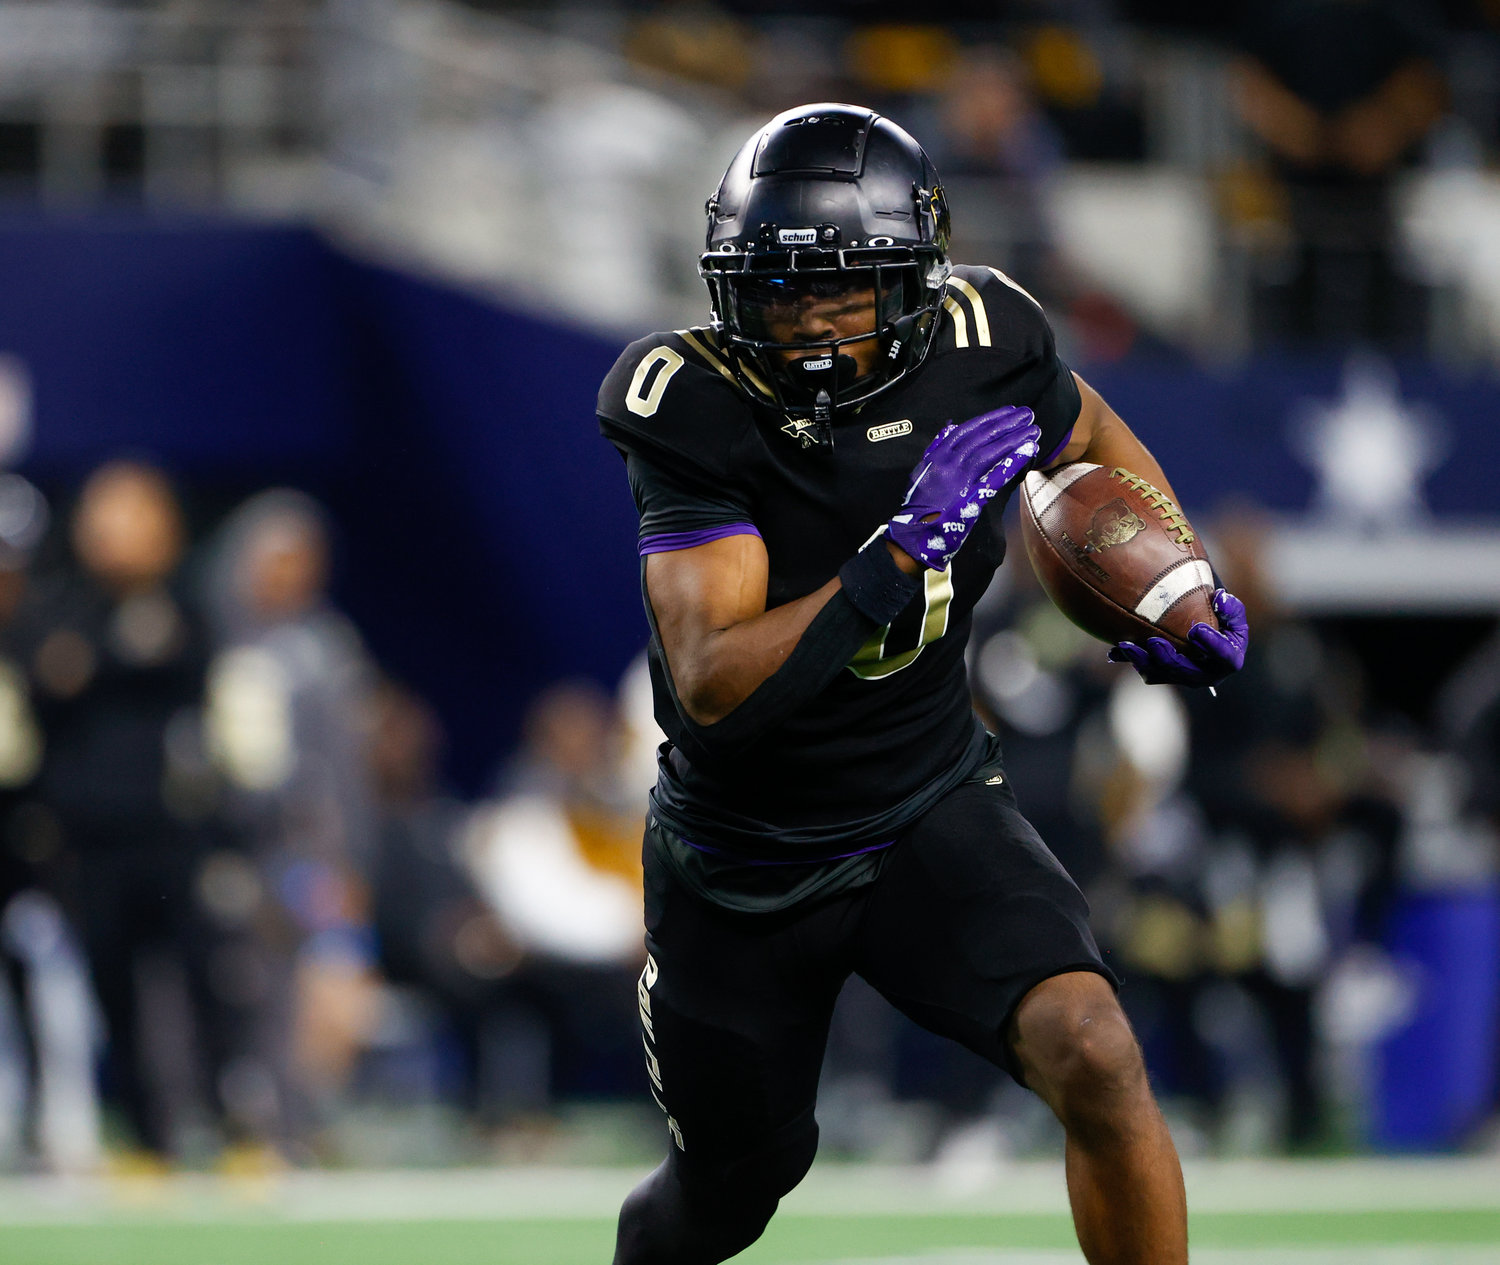 South Oak Cliff running back Jayvon Thomas (0) carries the ball during the Class 5A Division II football state championship game between South Oak Cliff and Port Neches-Groves in Arlington, Texas, on Dec. 16, 2022.